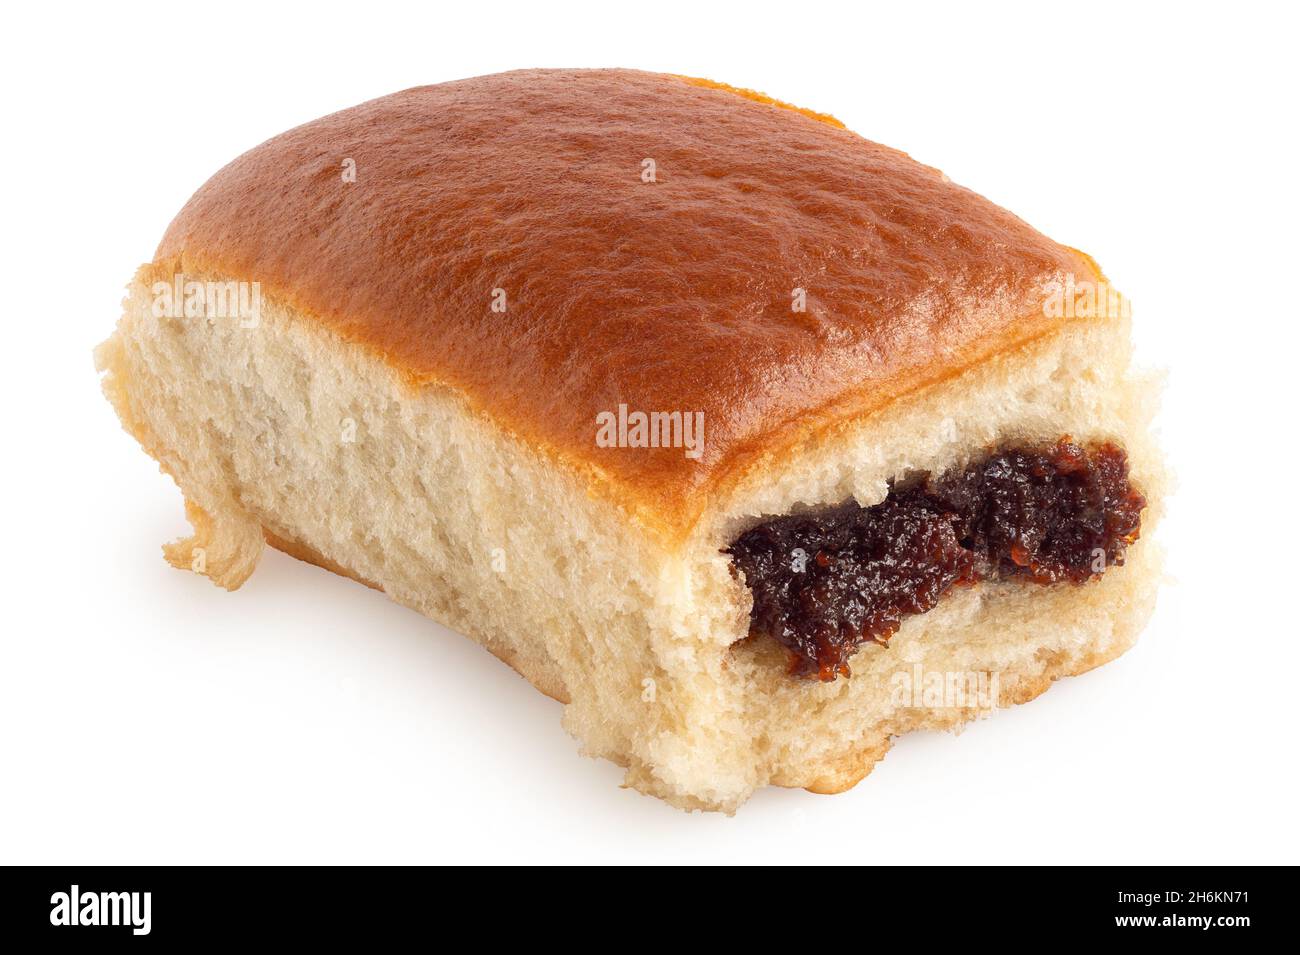 Czech yeast bun filled with plum jam isolated on white. Stock Photo